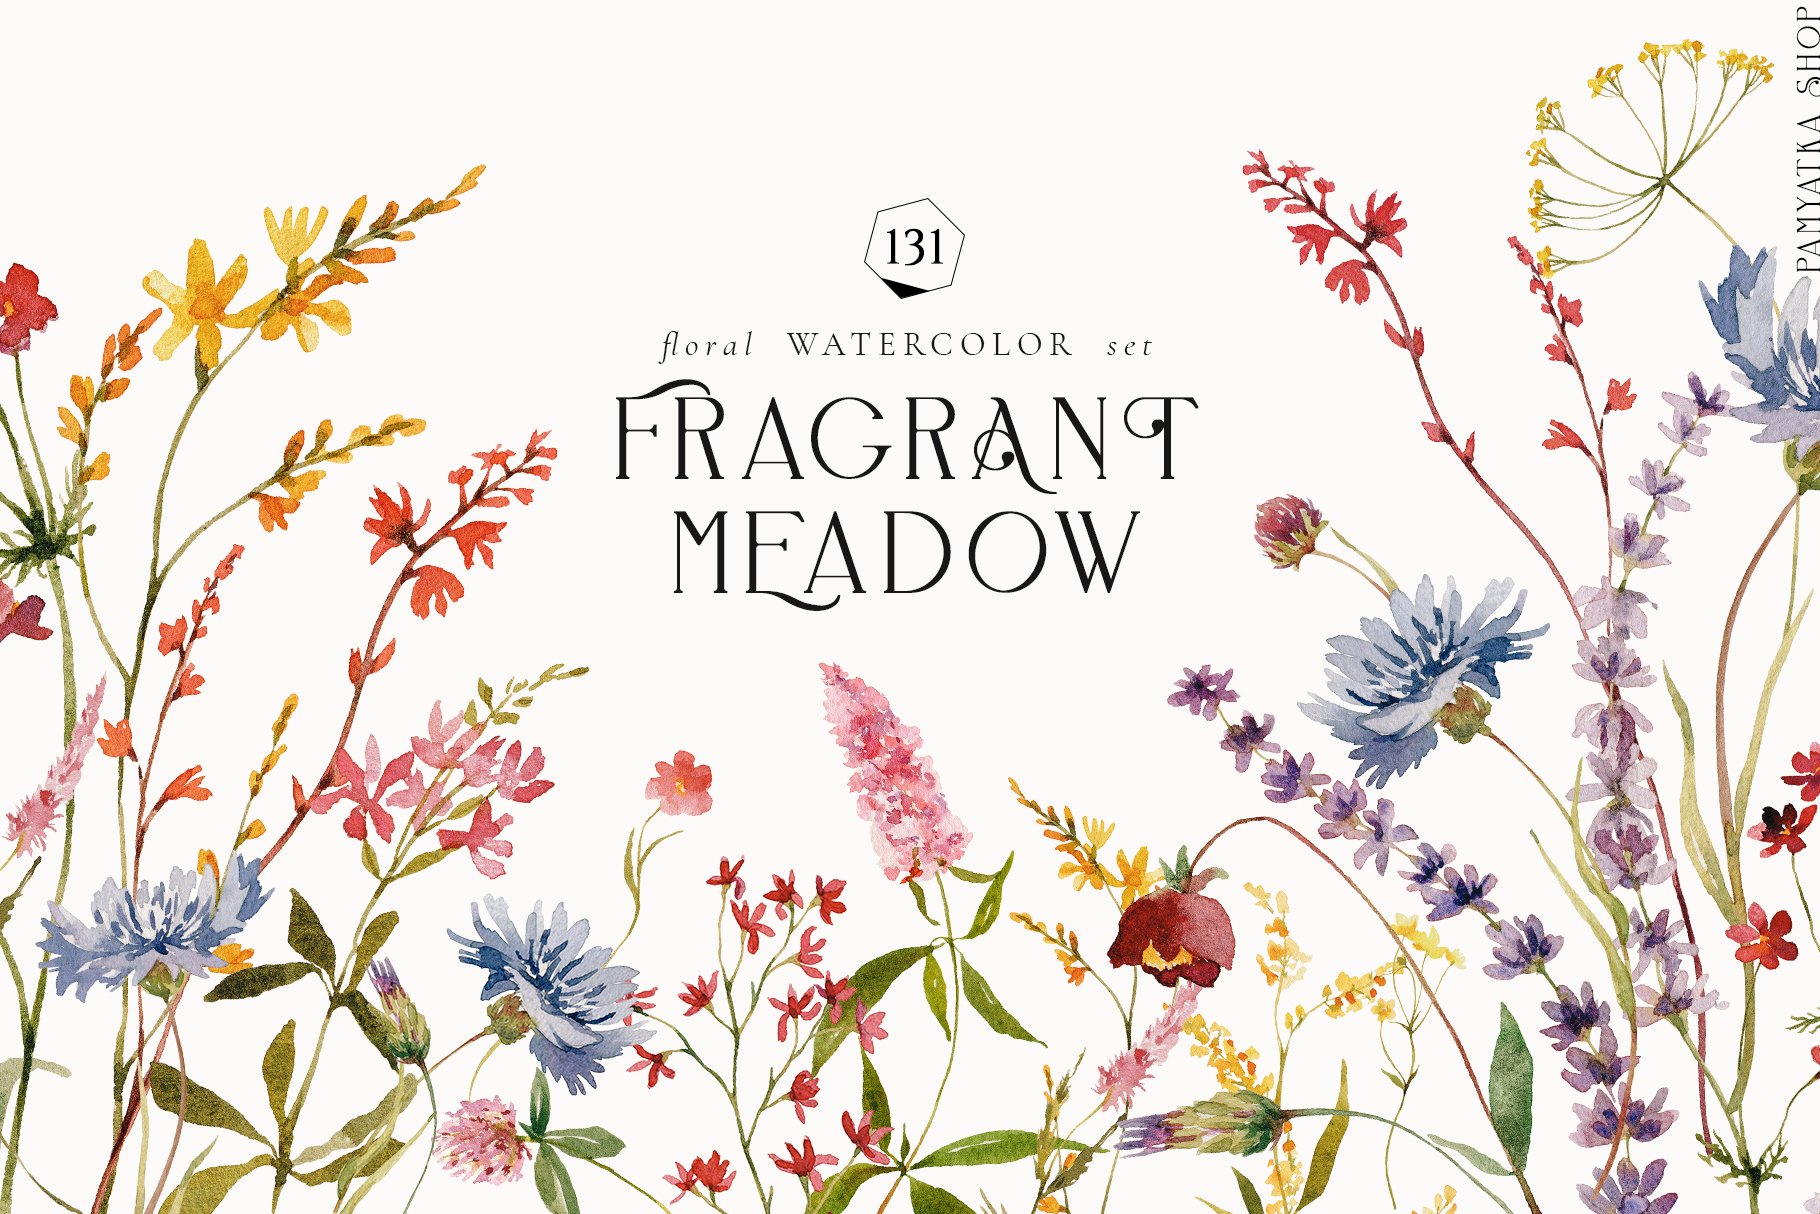 Fragrant Meadow - watercolor flowers cover image.